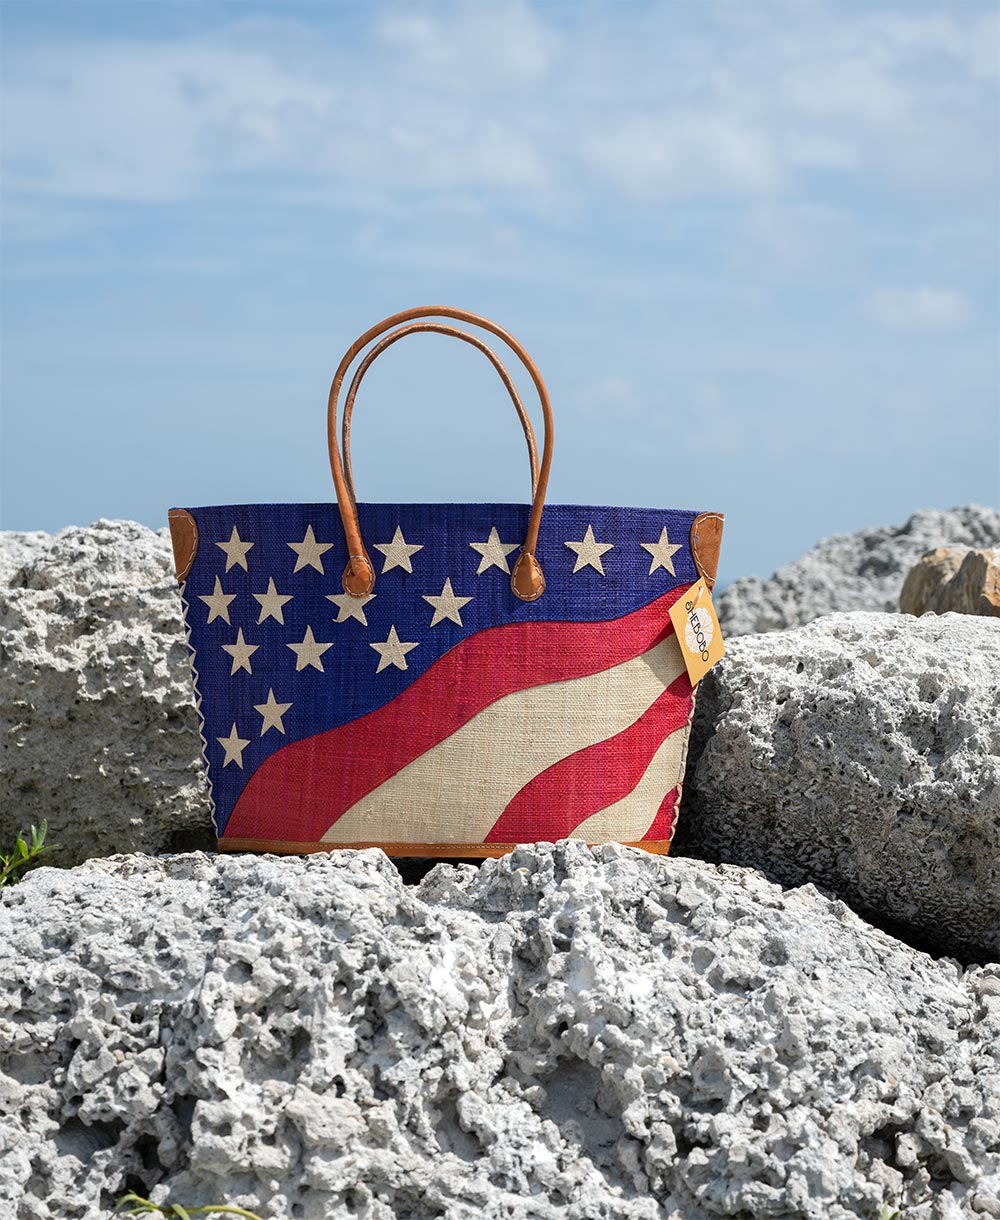 Front view of the Shebobo American Flag Straw Tote Bag at the beach on rocks